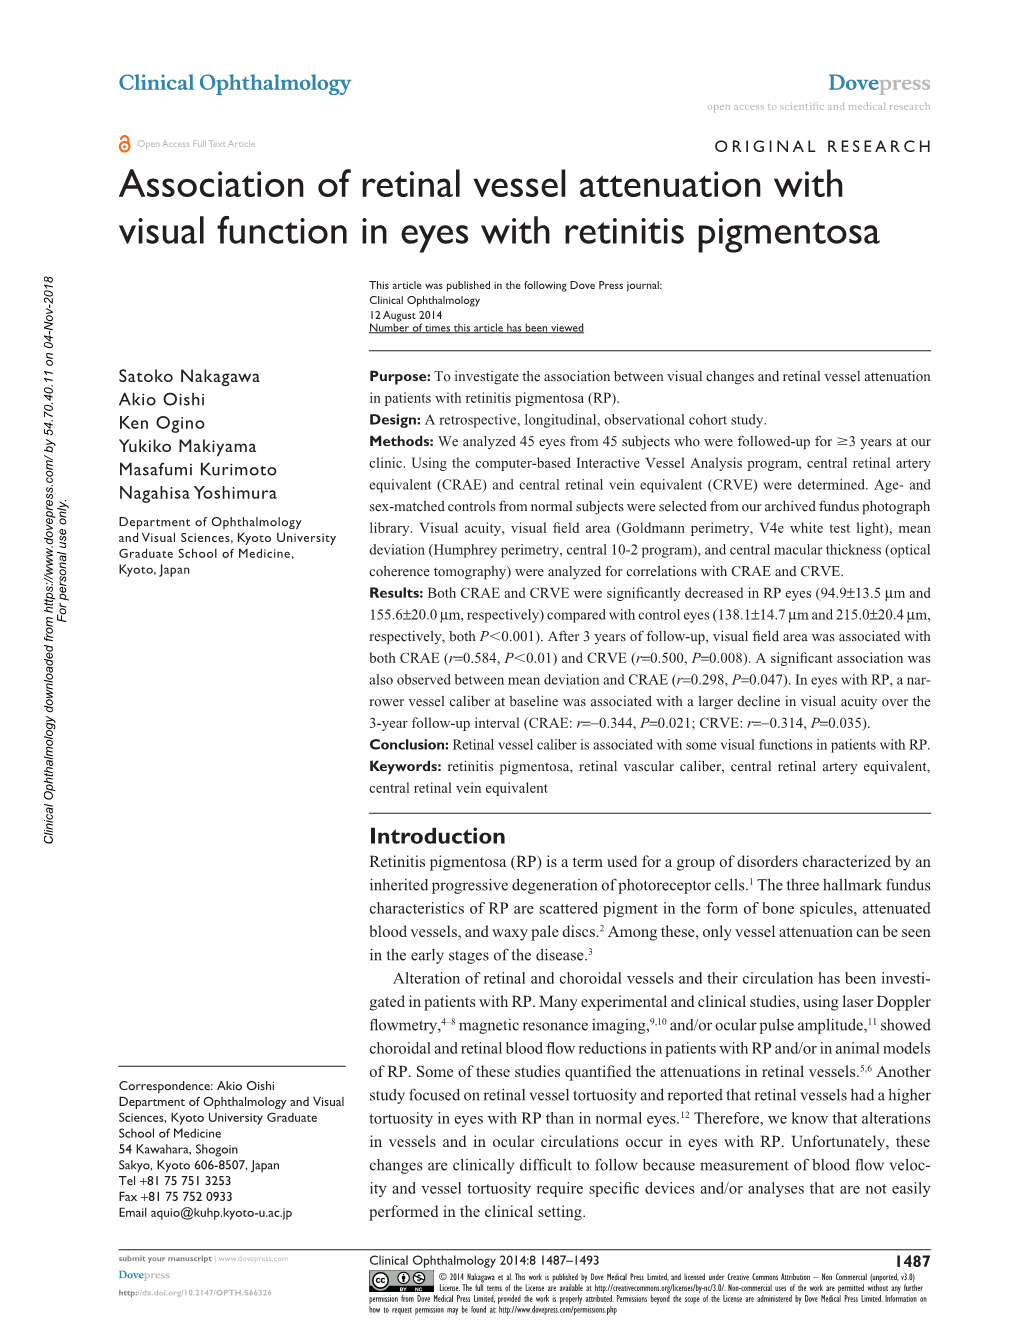 Association of Retinal Vessel Attenuation with Visual Function in Eyes with Retinitis Pigmentosa